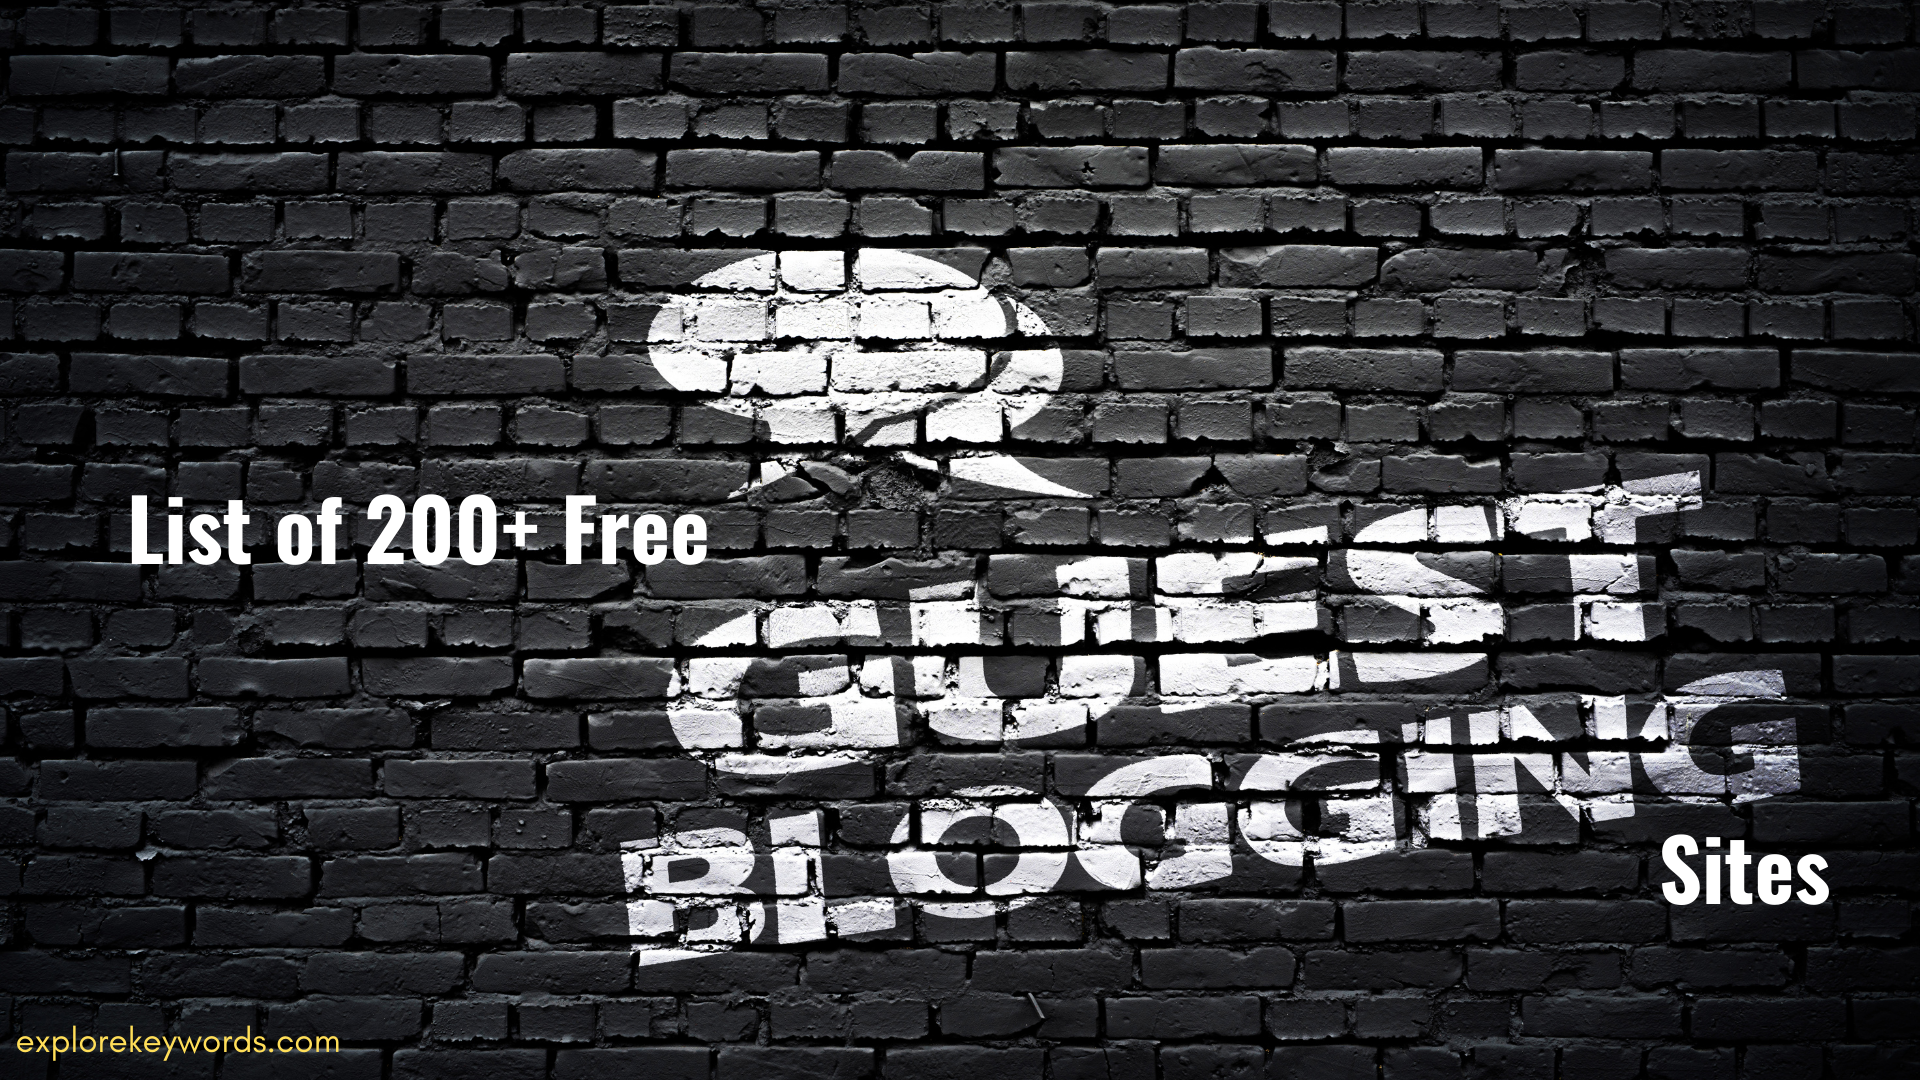 Top 200+ Free Guest Posting Sites List